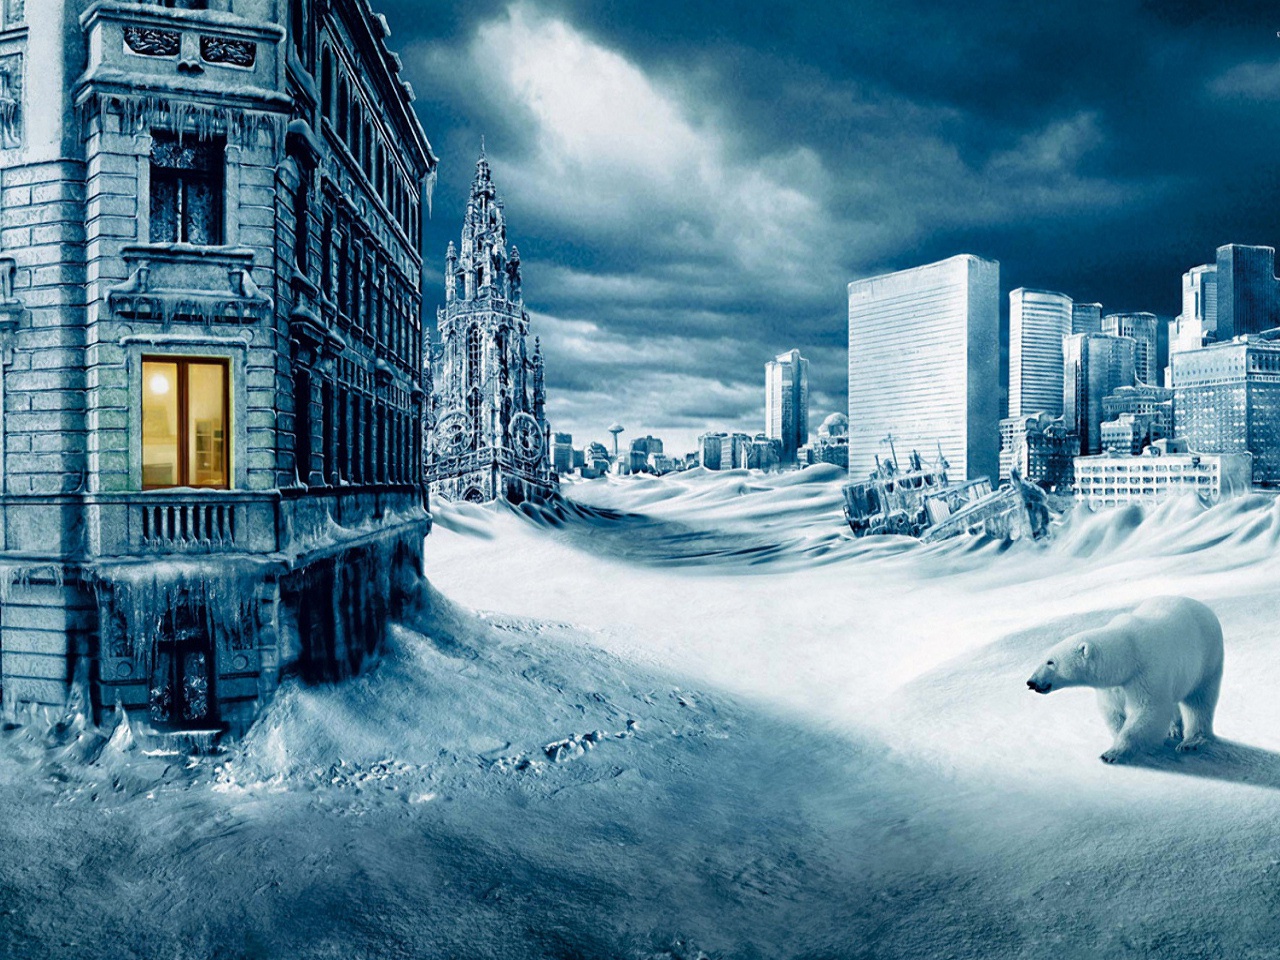 New Ice Age in 1280x960 resolution - HD Desktop Wallpapers